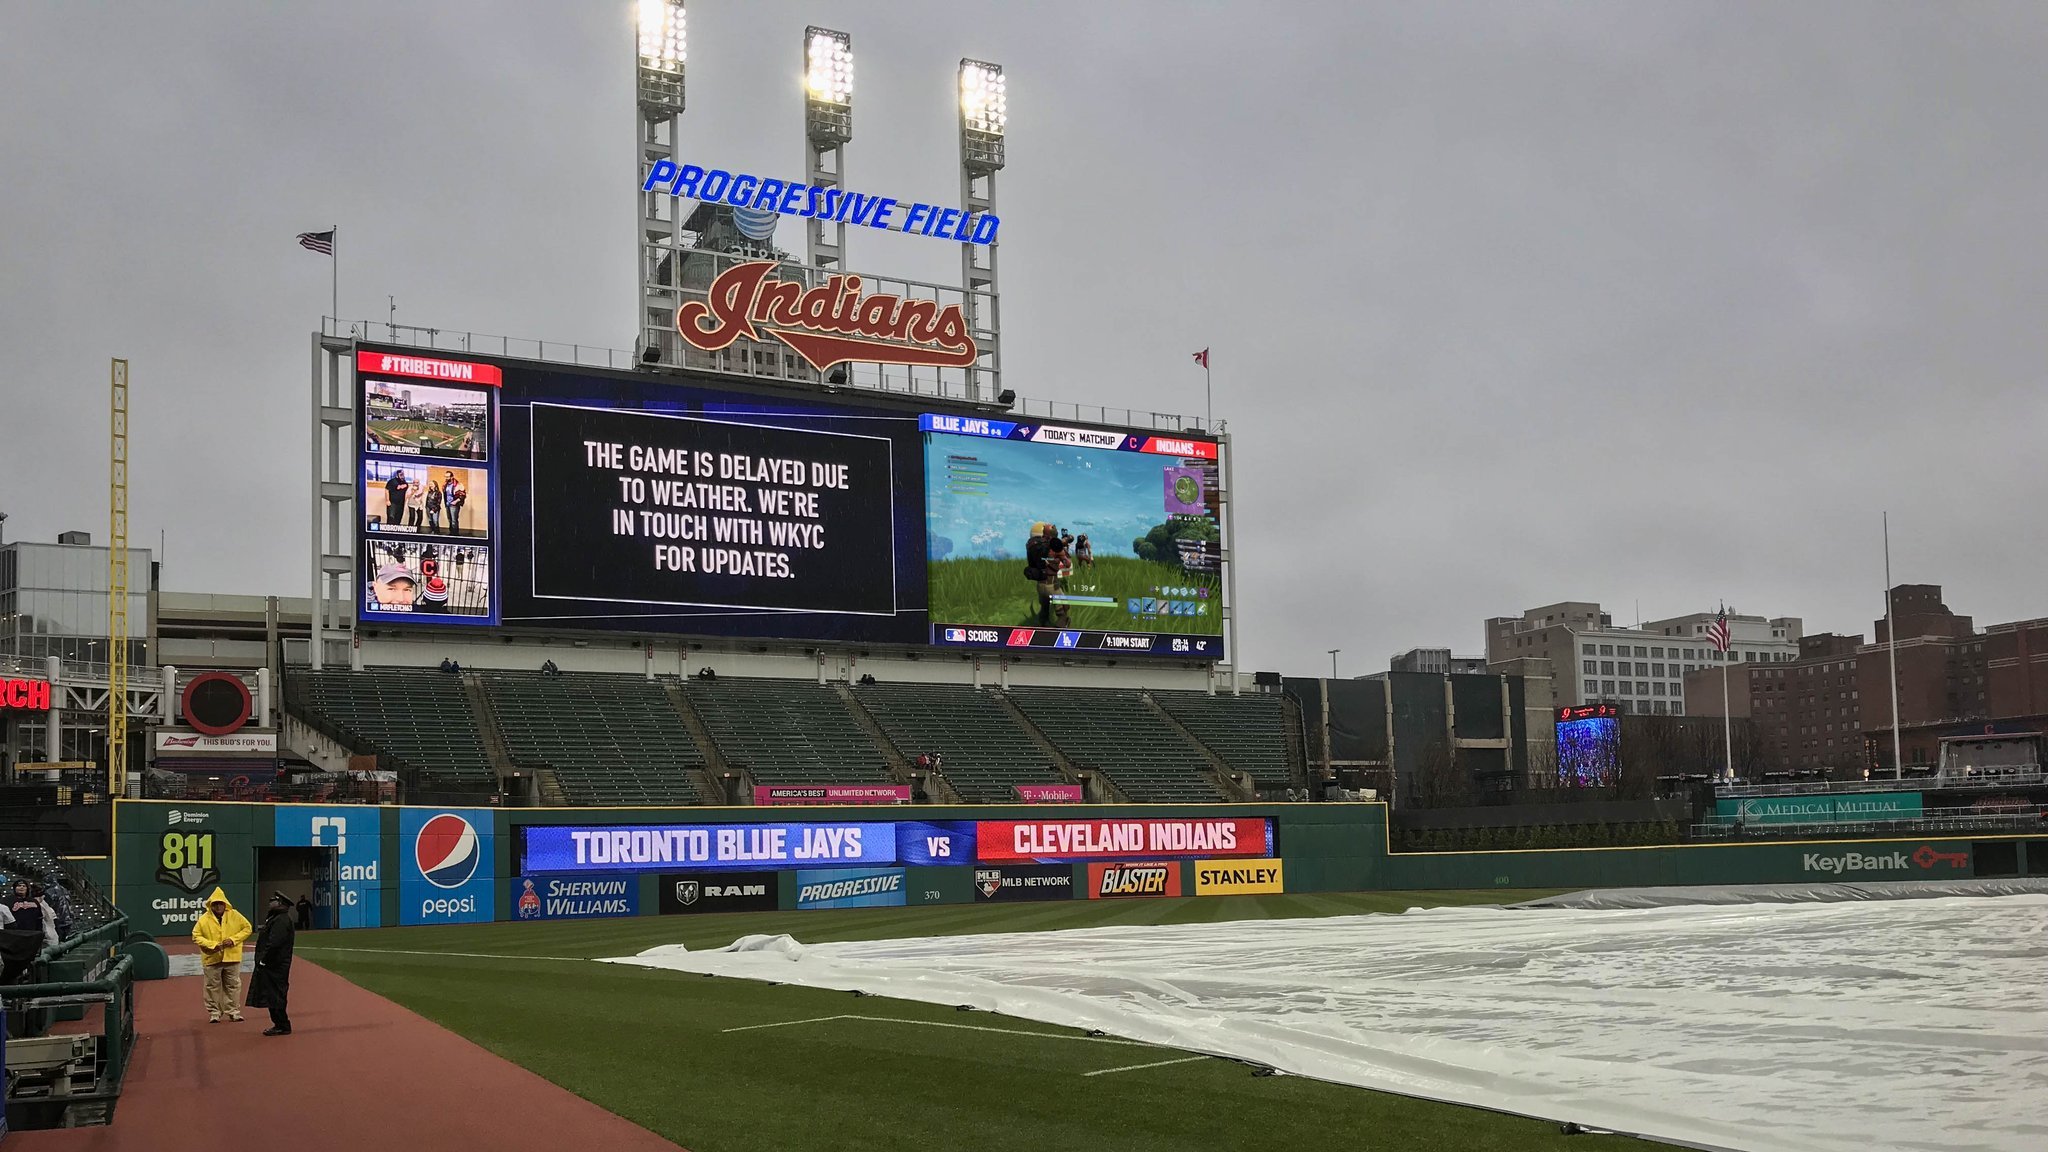 Cleveland Indians' game postponed due to weather